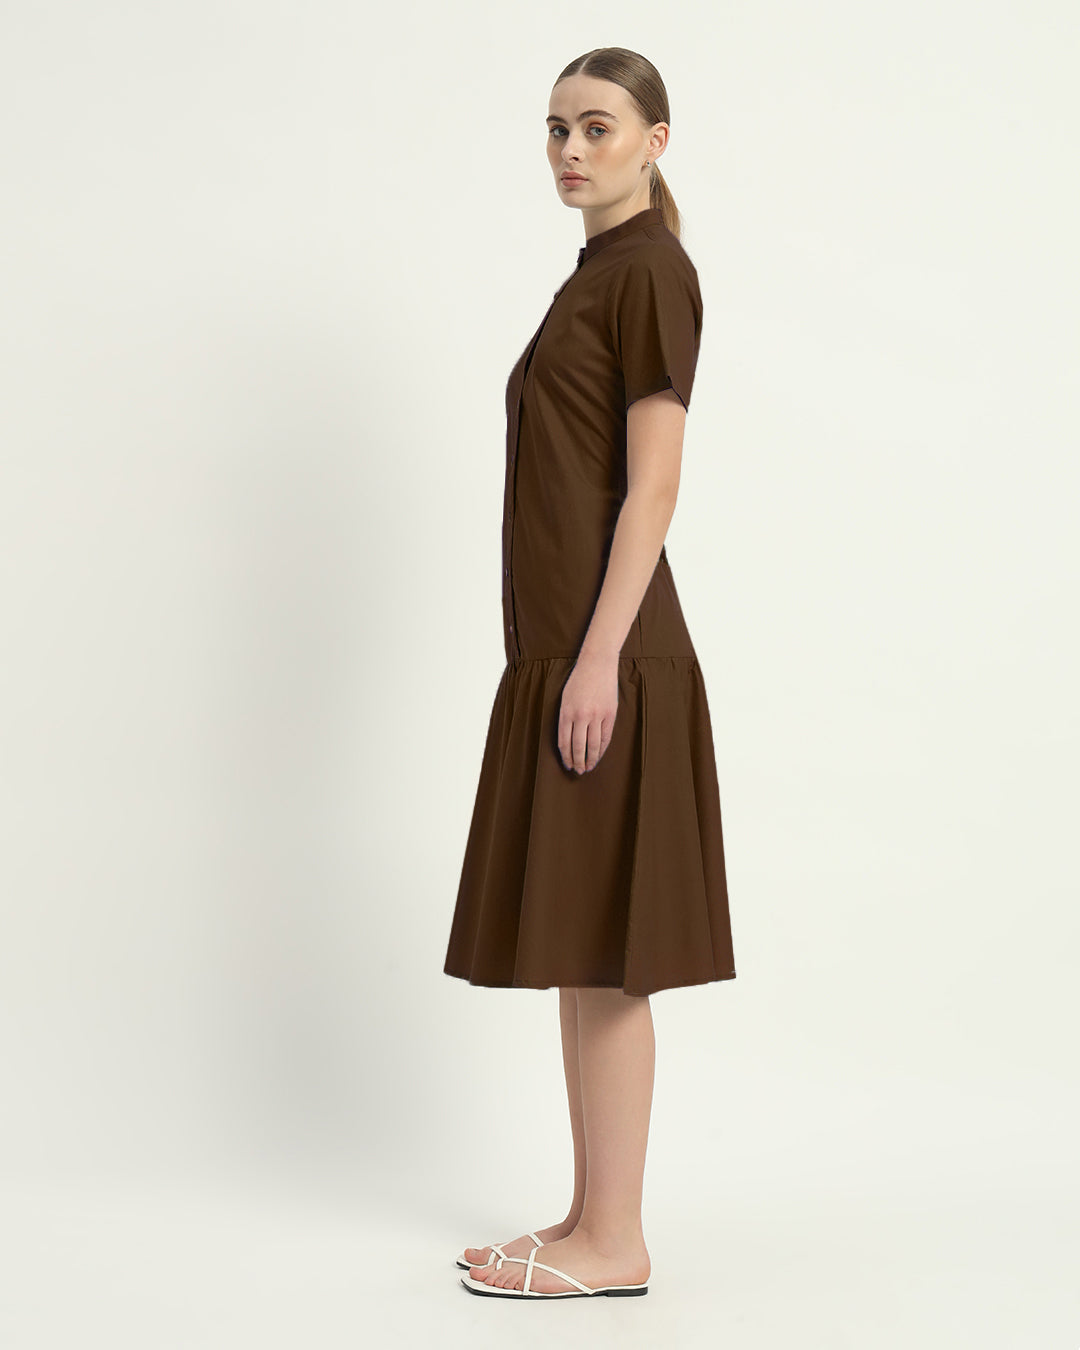 The Nutshell Melrose Cotton Dress